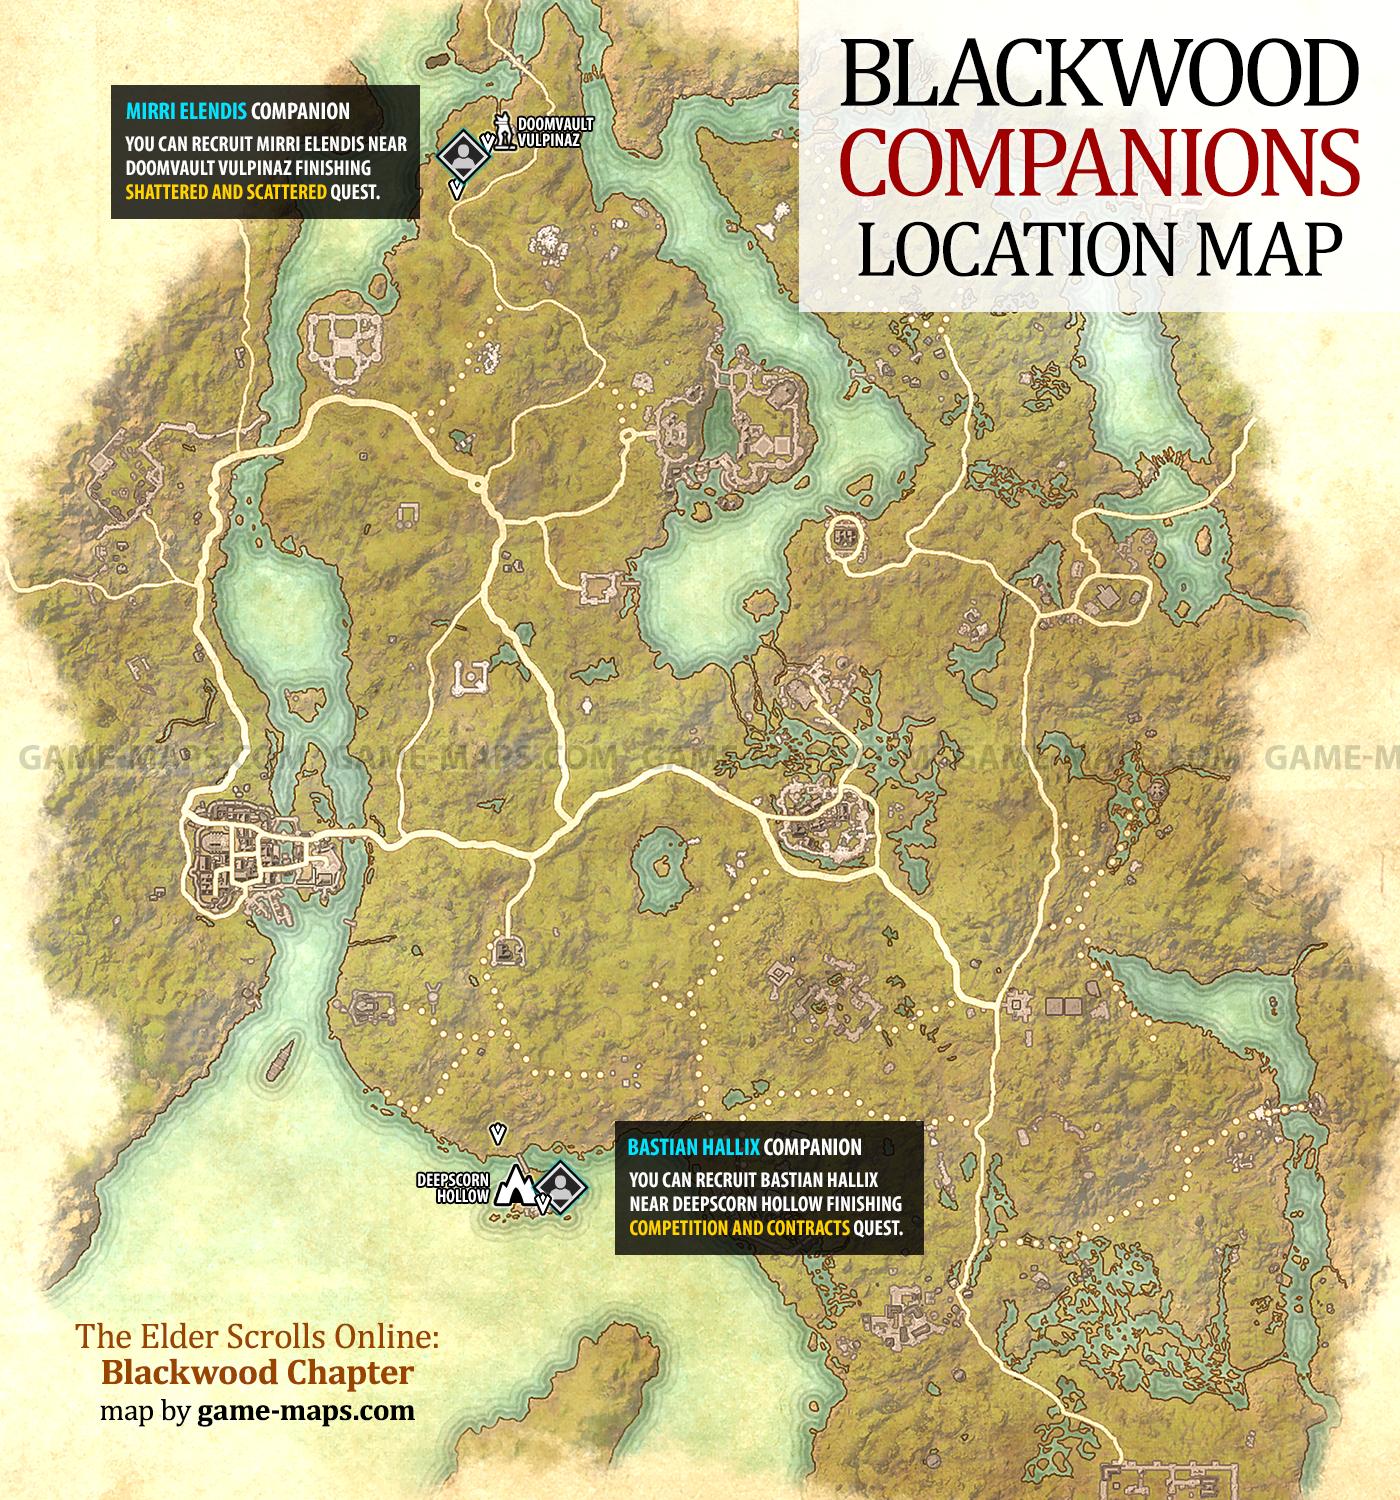 Companions Location Map in Blackwood for The Elder Scrolls Online (ESO) - The Elder Scrolls Online (ESO)